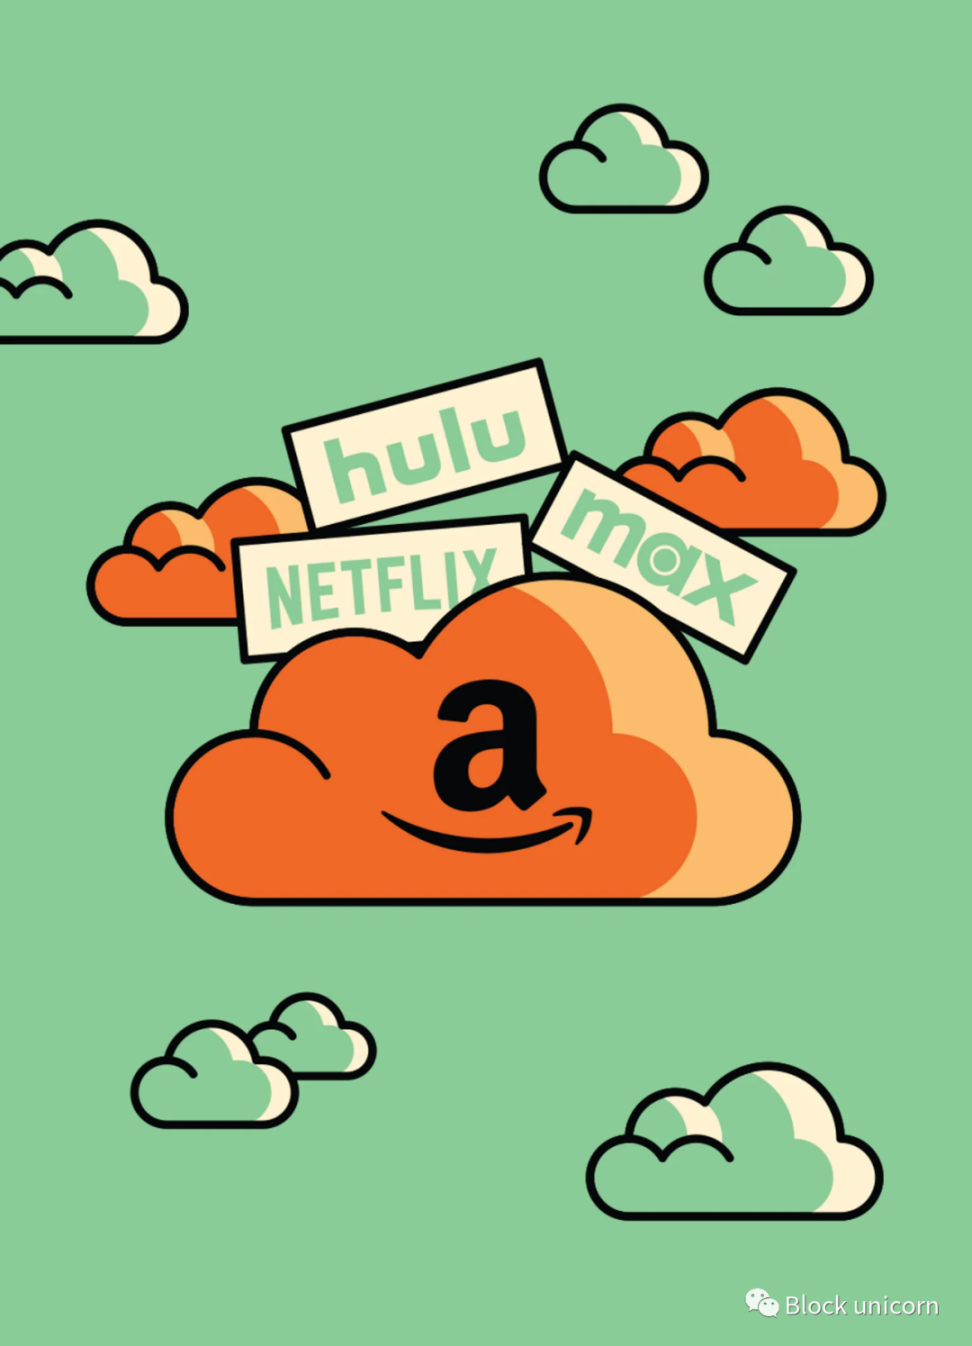 Why is Amazon launching a Bezos stablecoin?